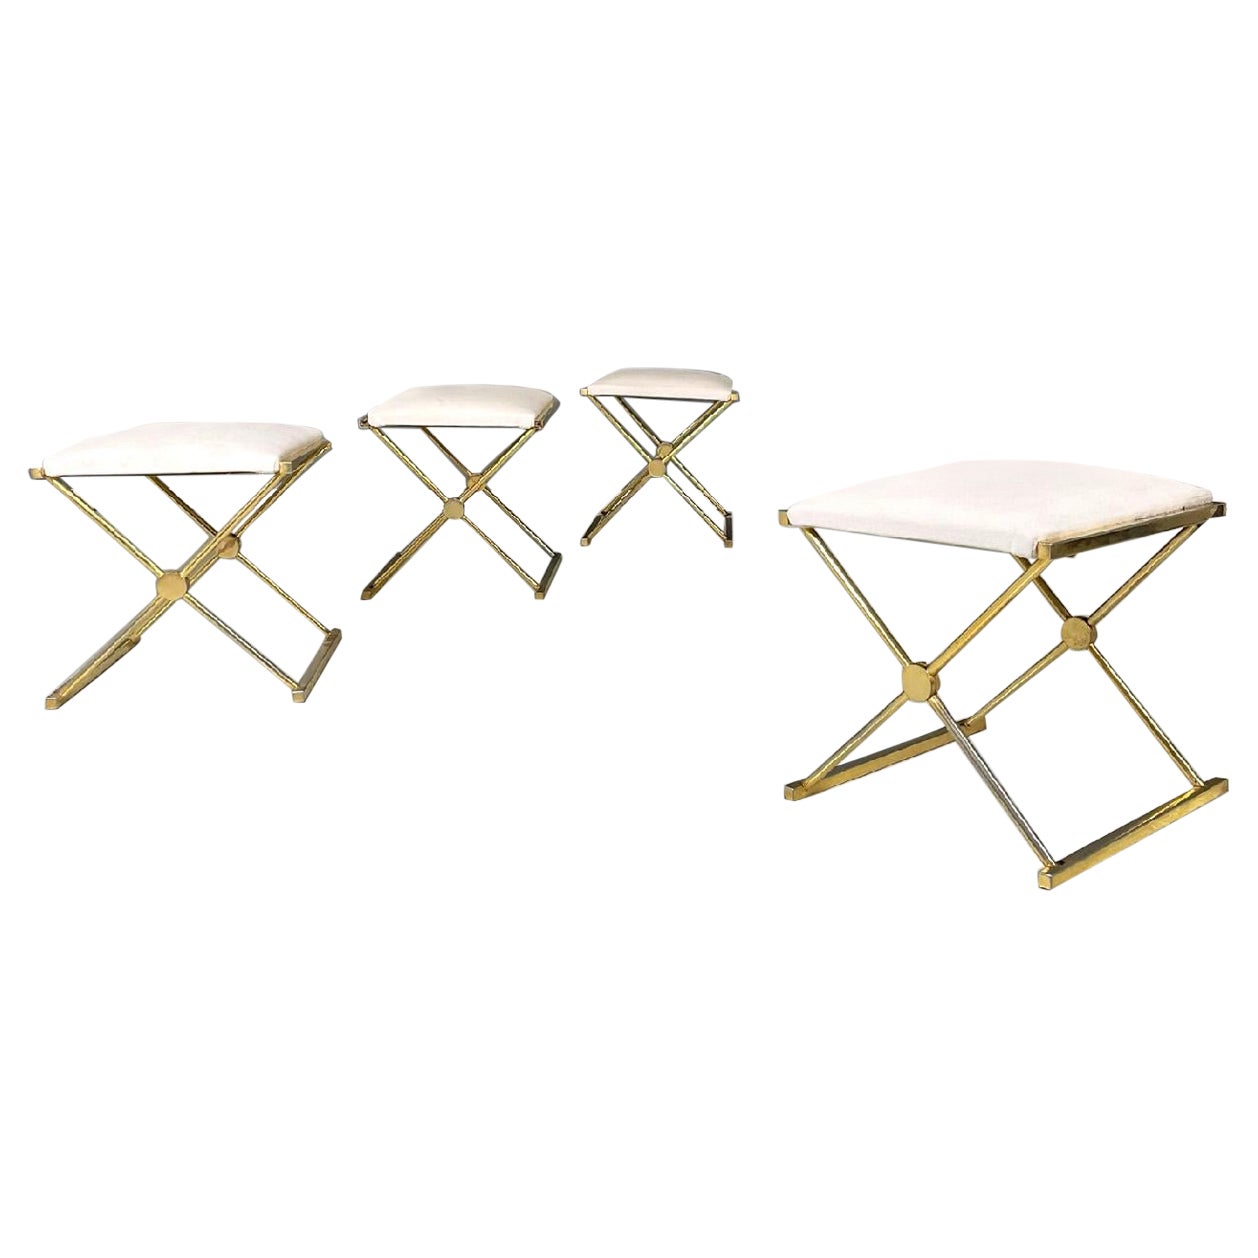 Italian modern stools in golden metal and white fabric, 1980s For Sale